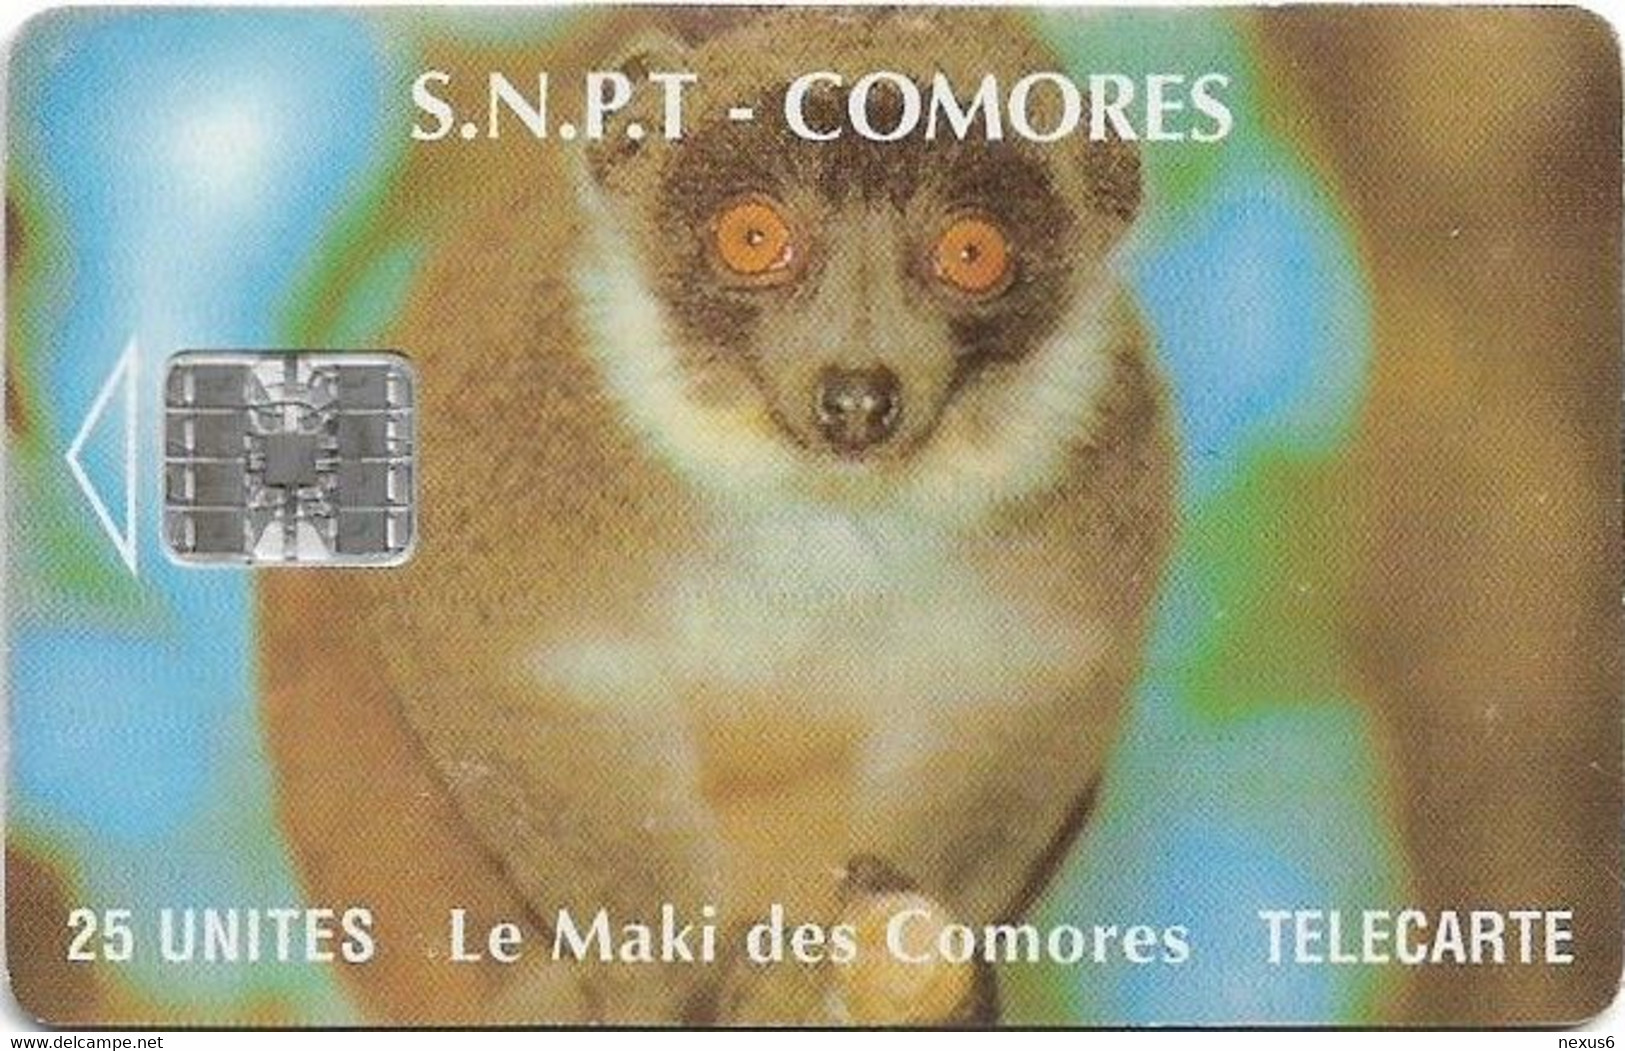 Comoros - S.N.P.T. - Maki, Without Moreno Up Right, Without Cn., SC7, 1994, 25Units, Used - Comore